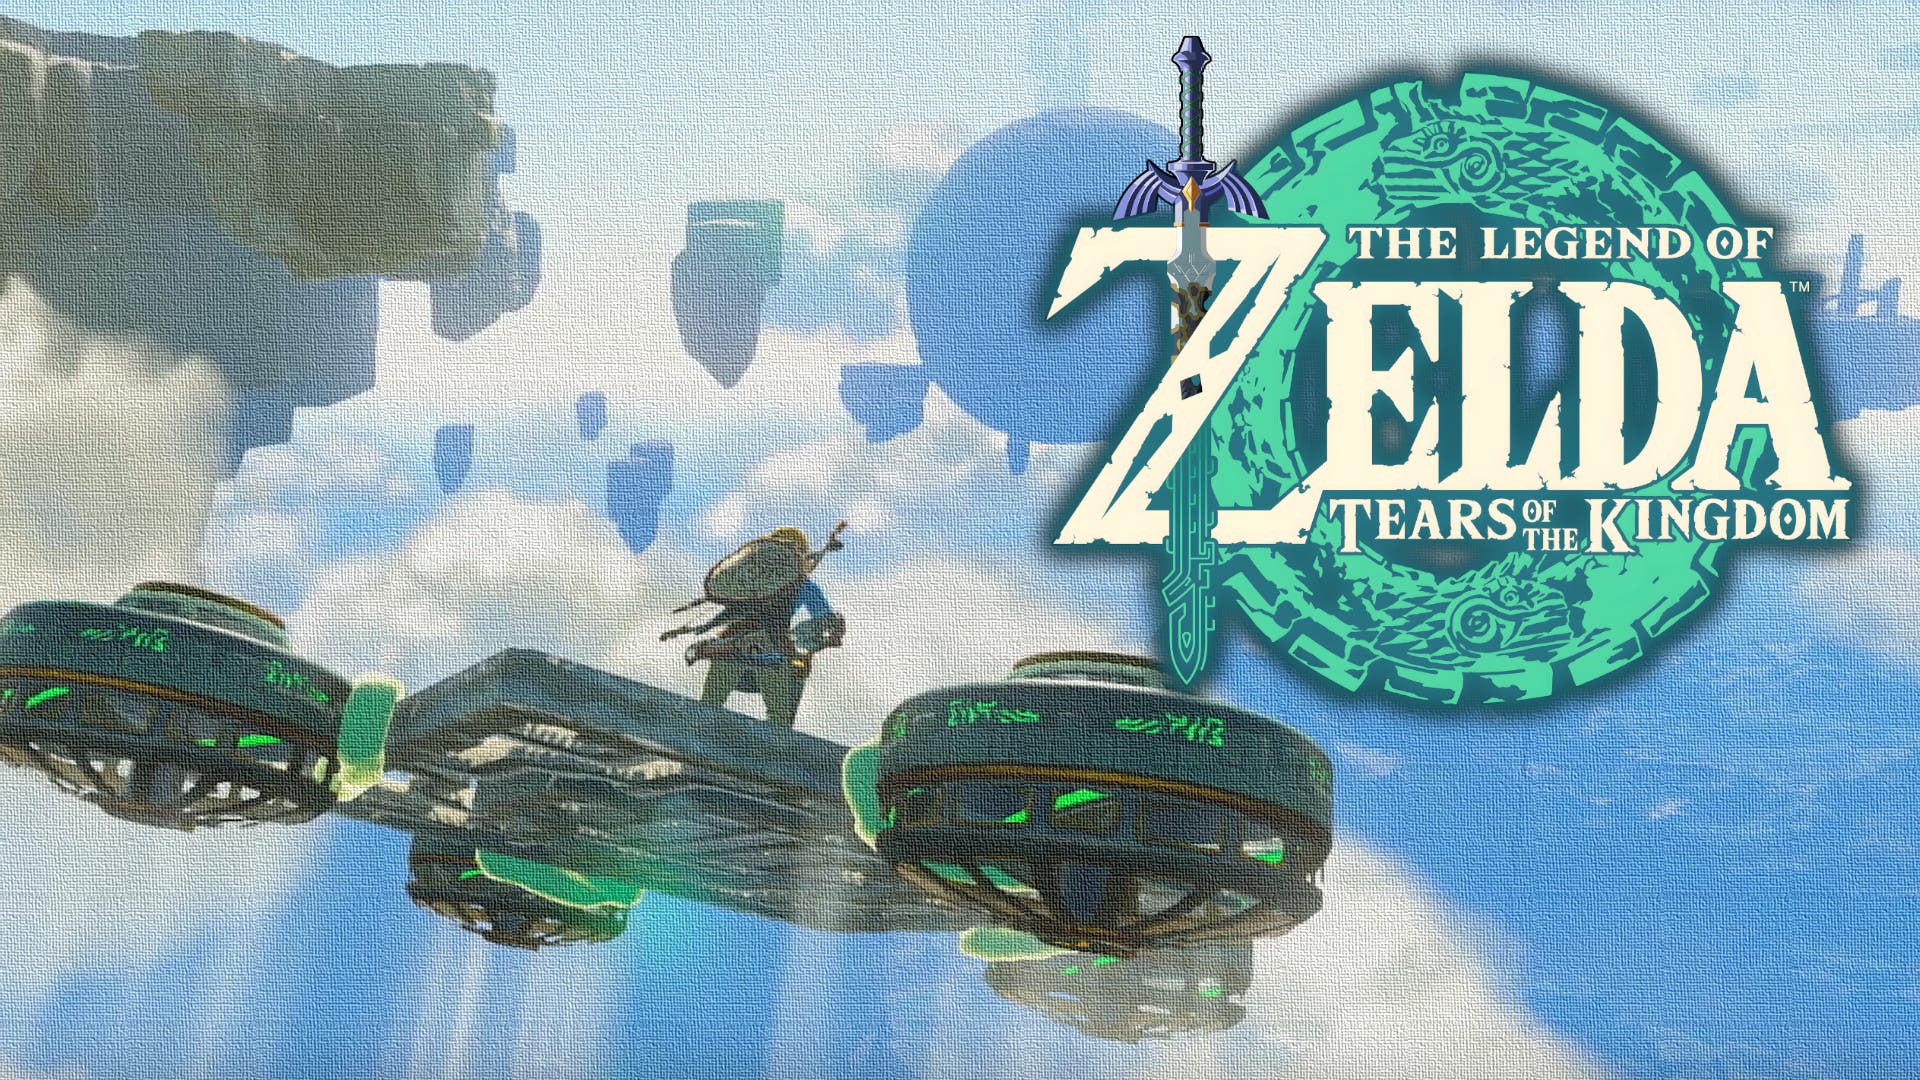 Merge weapons, manipulate time;  Zelda: Tears of the Kingdom shines in its new gameplay